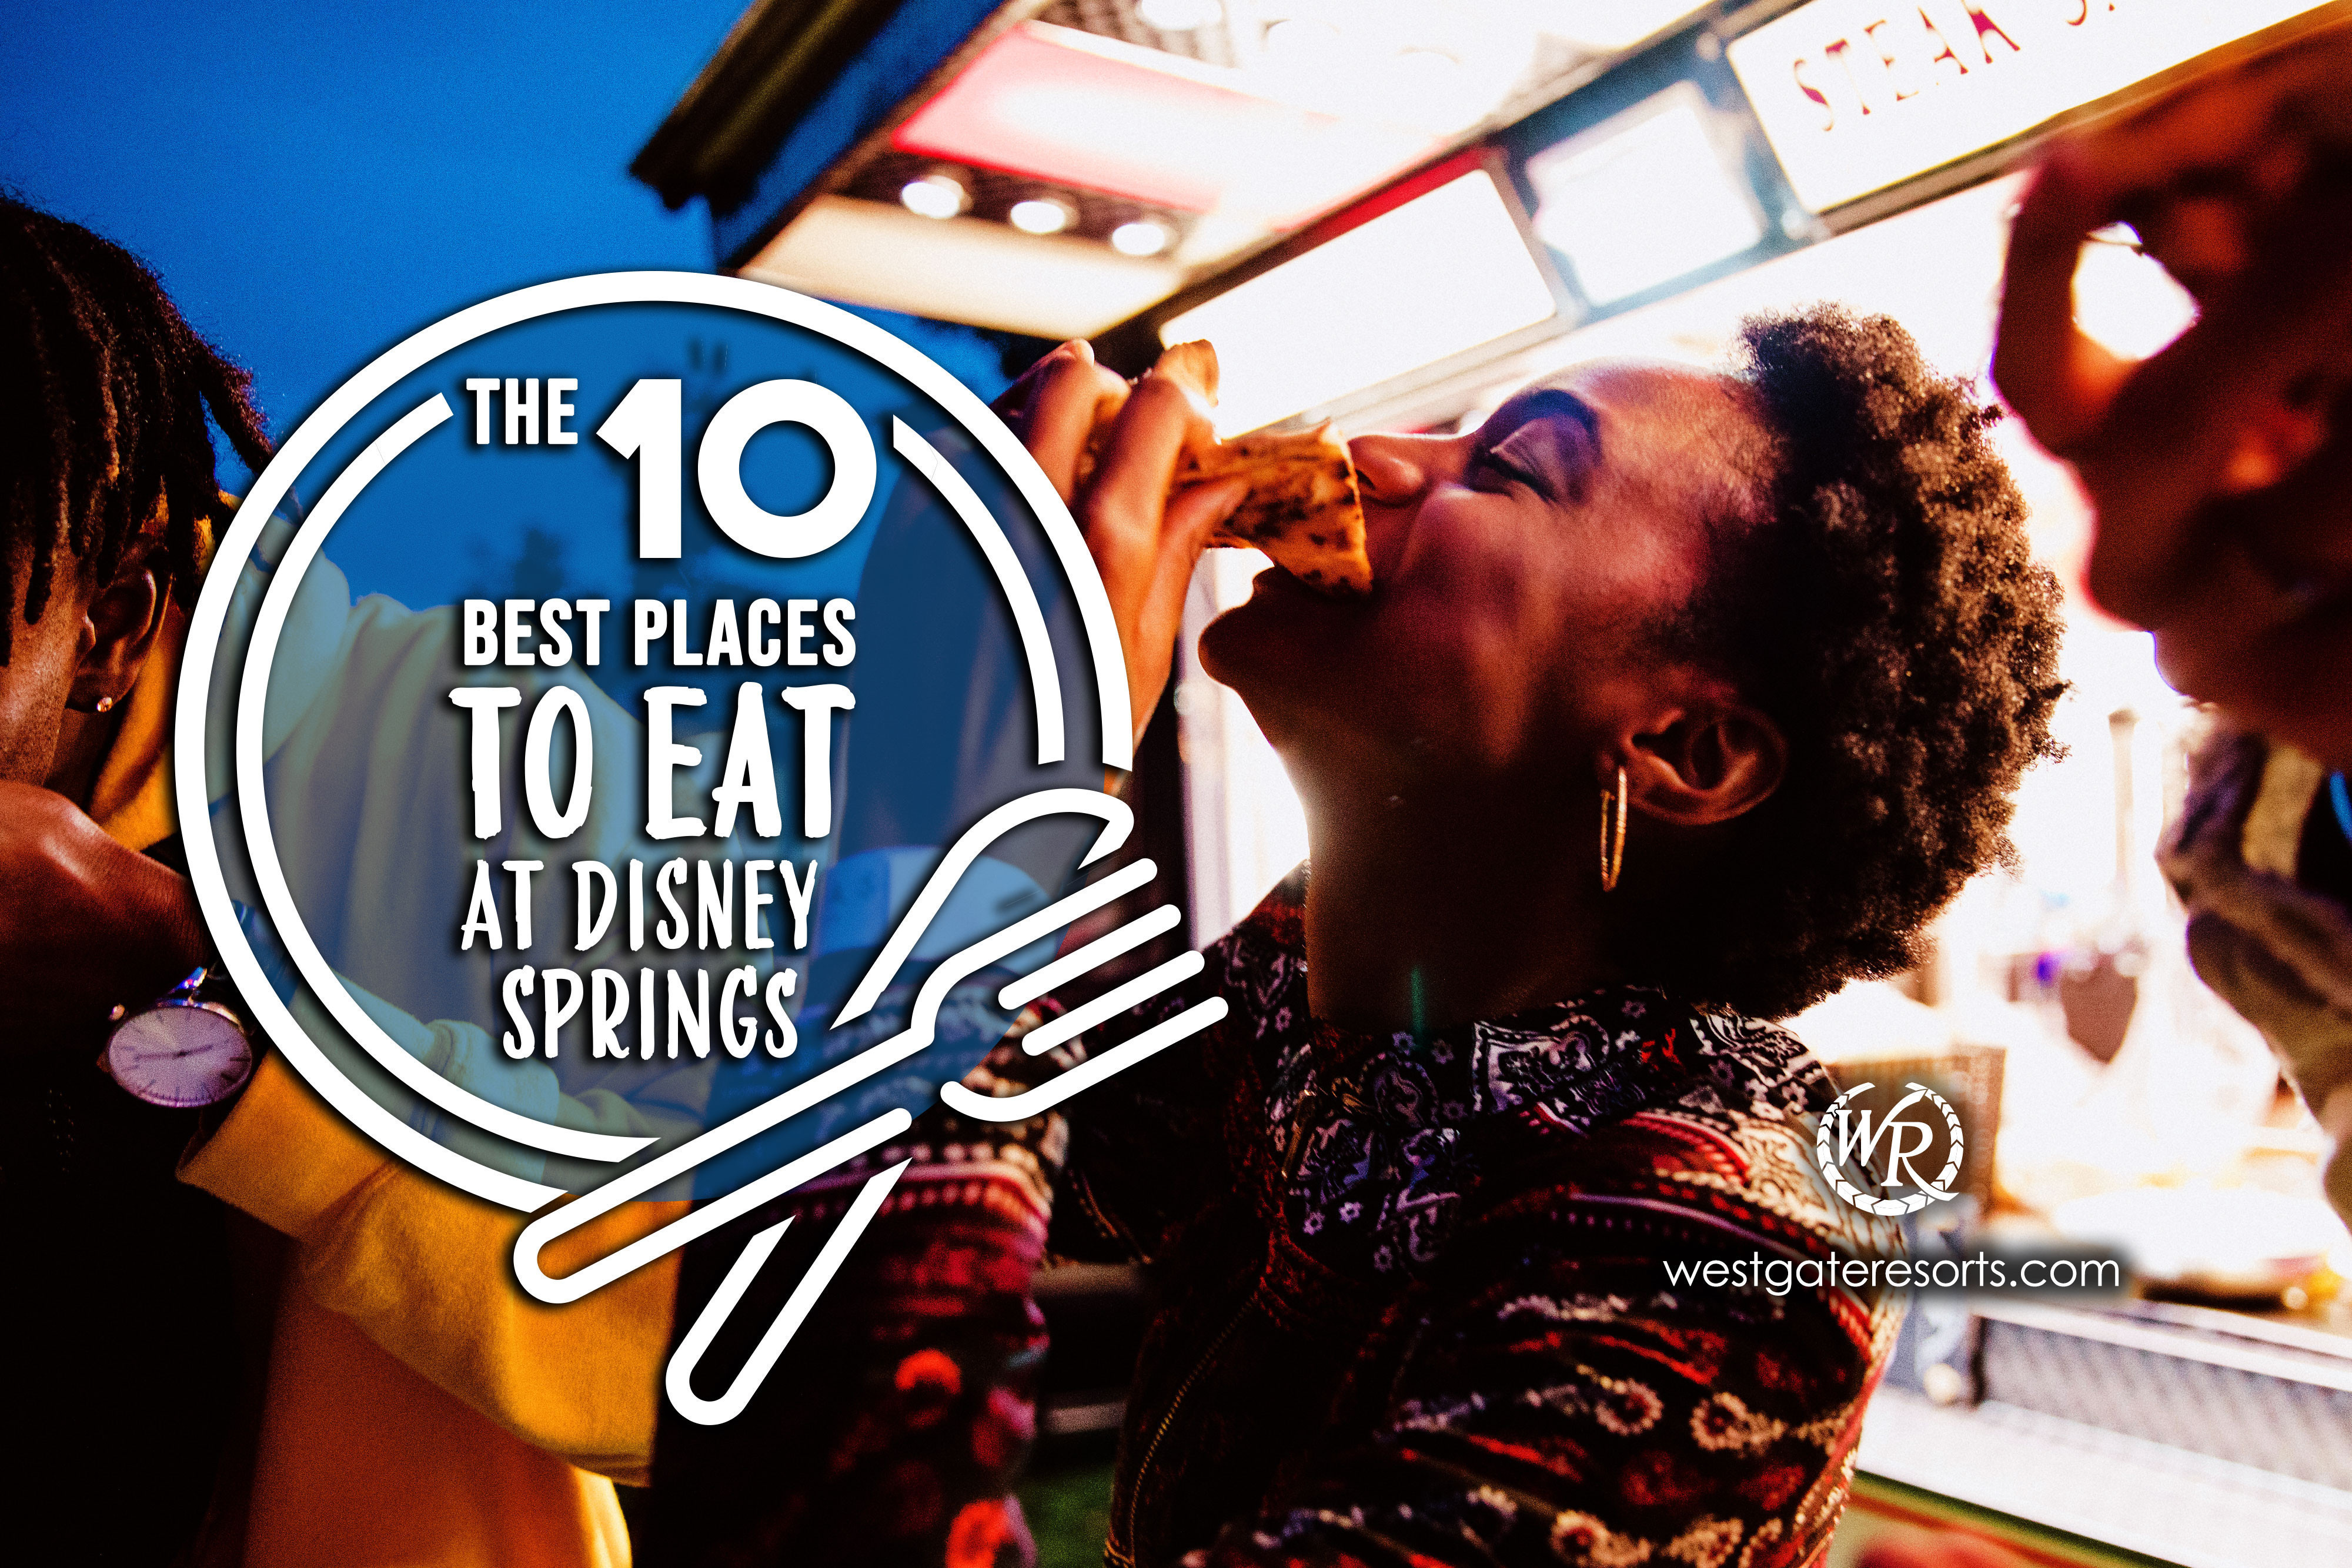 The 10 Best Places to Eat at Disney Springs